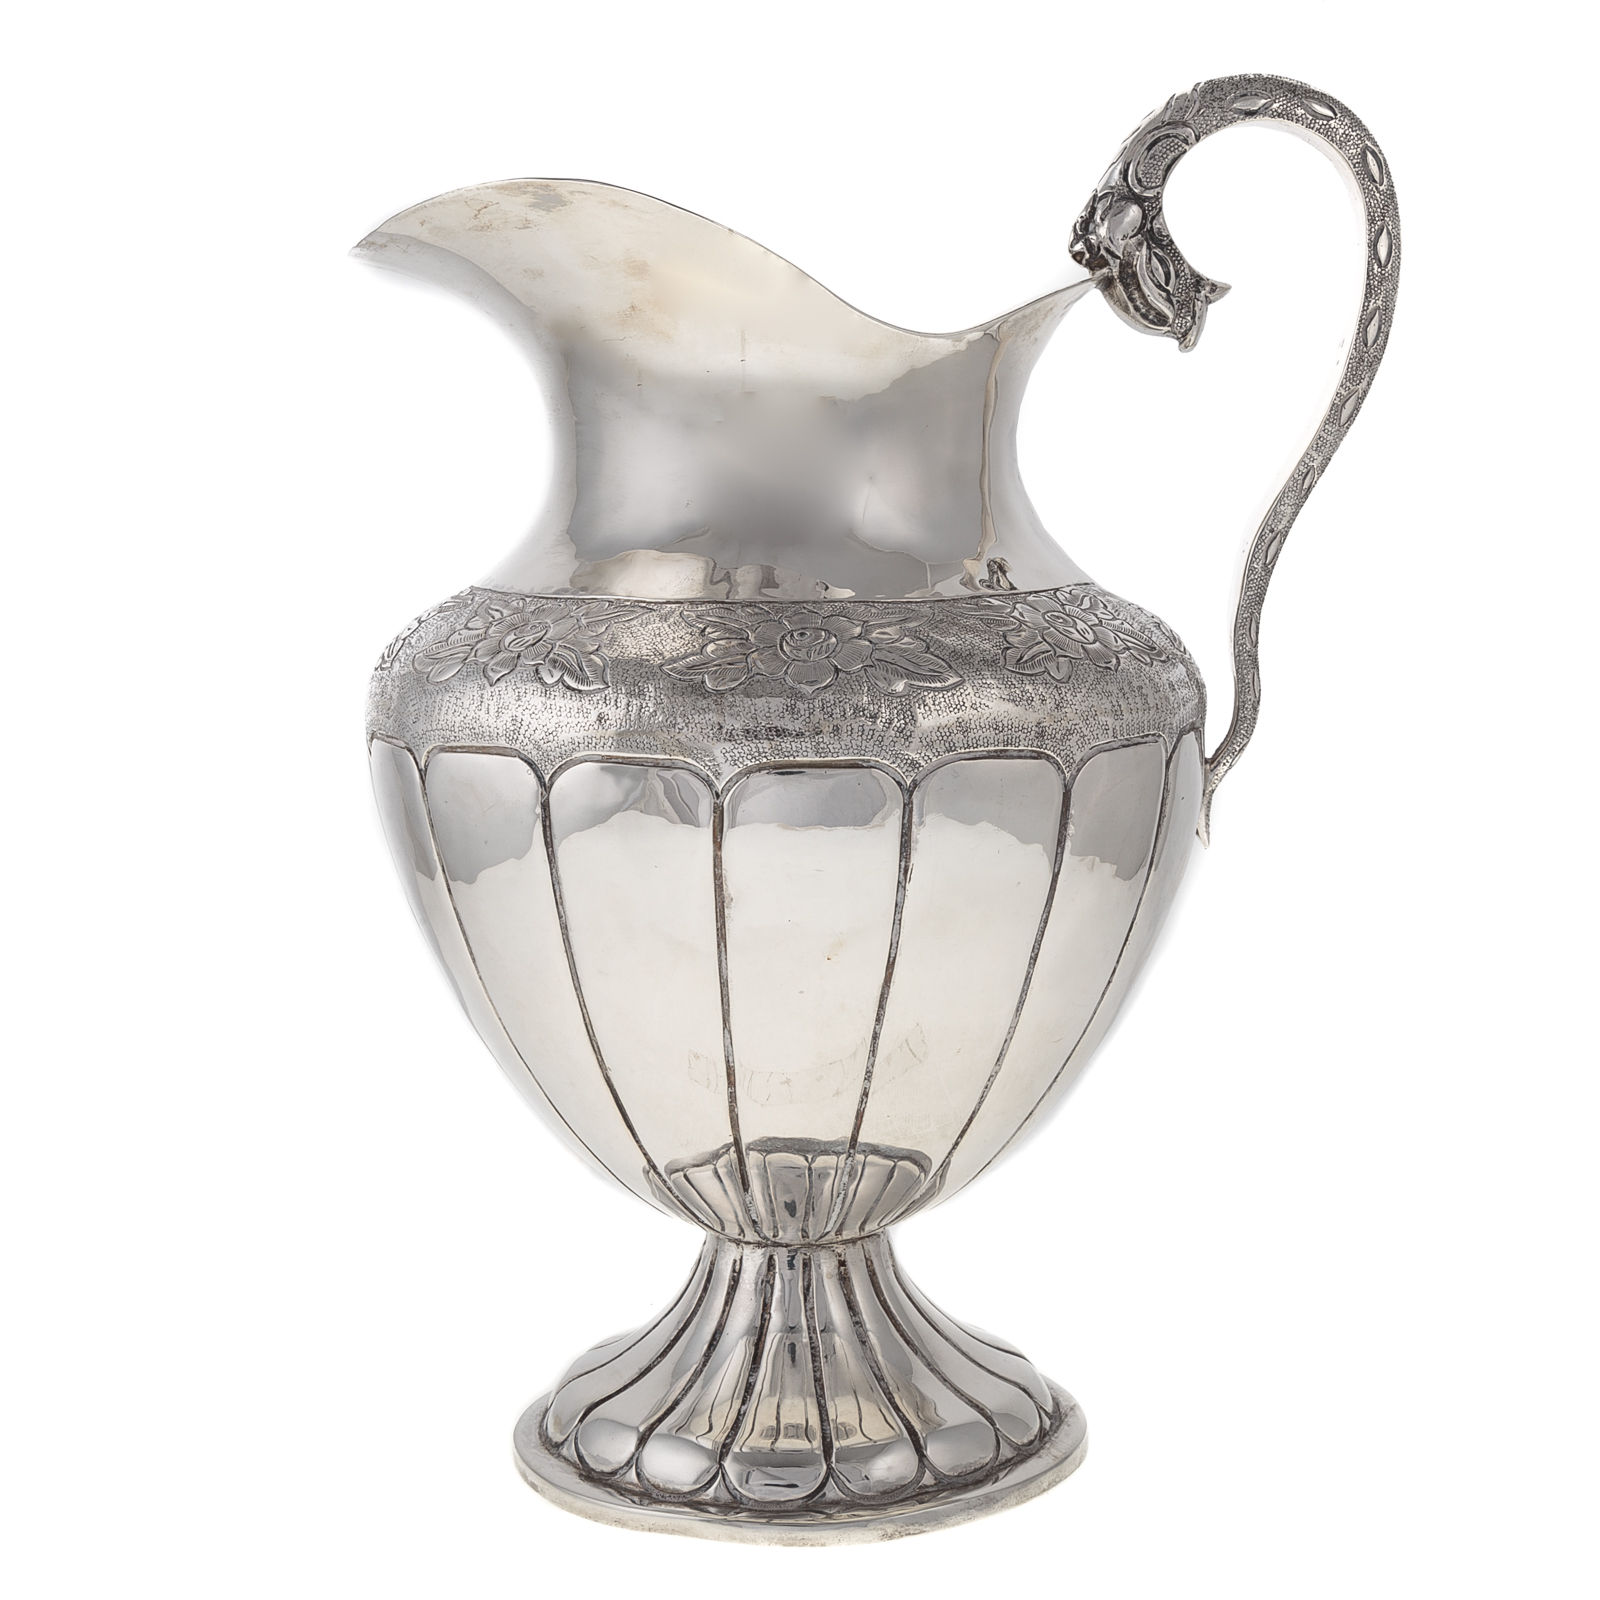 EARLY MEXICAN SILVER WATER PITCHER 29e08b